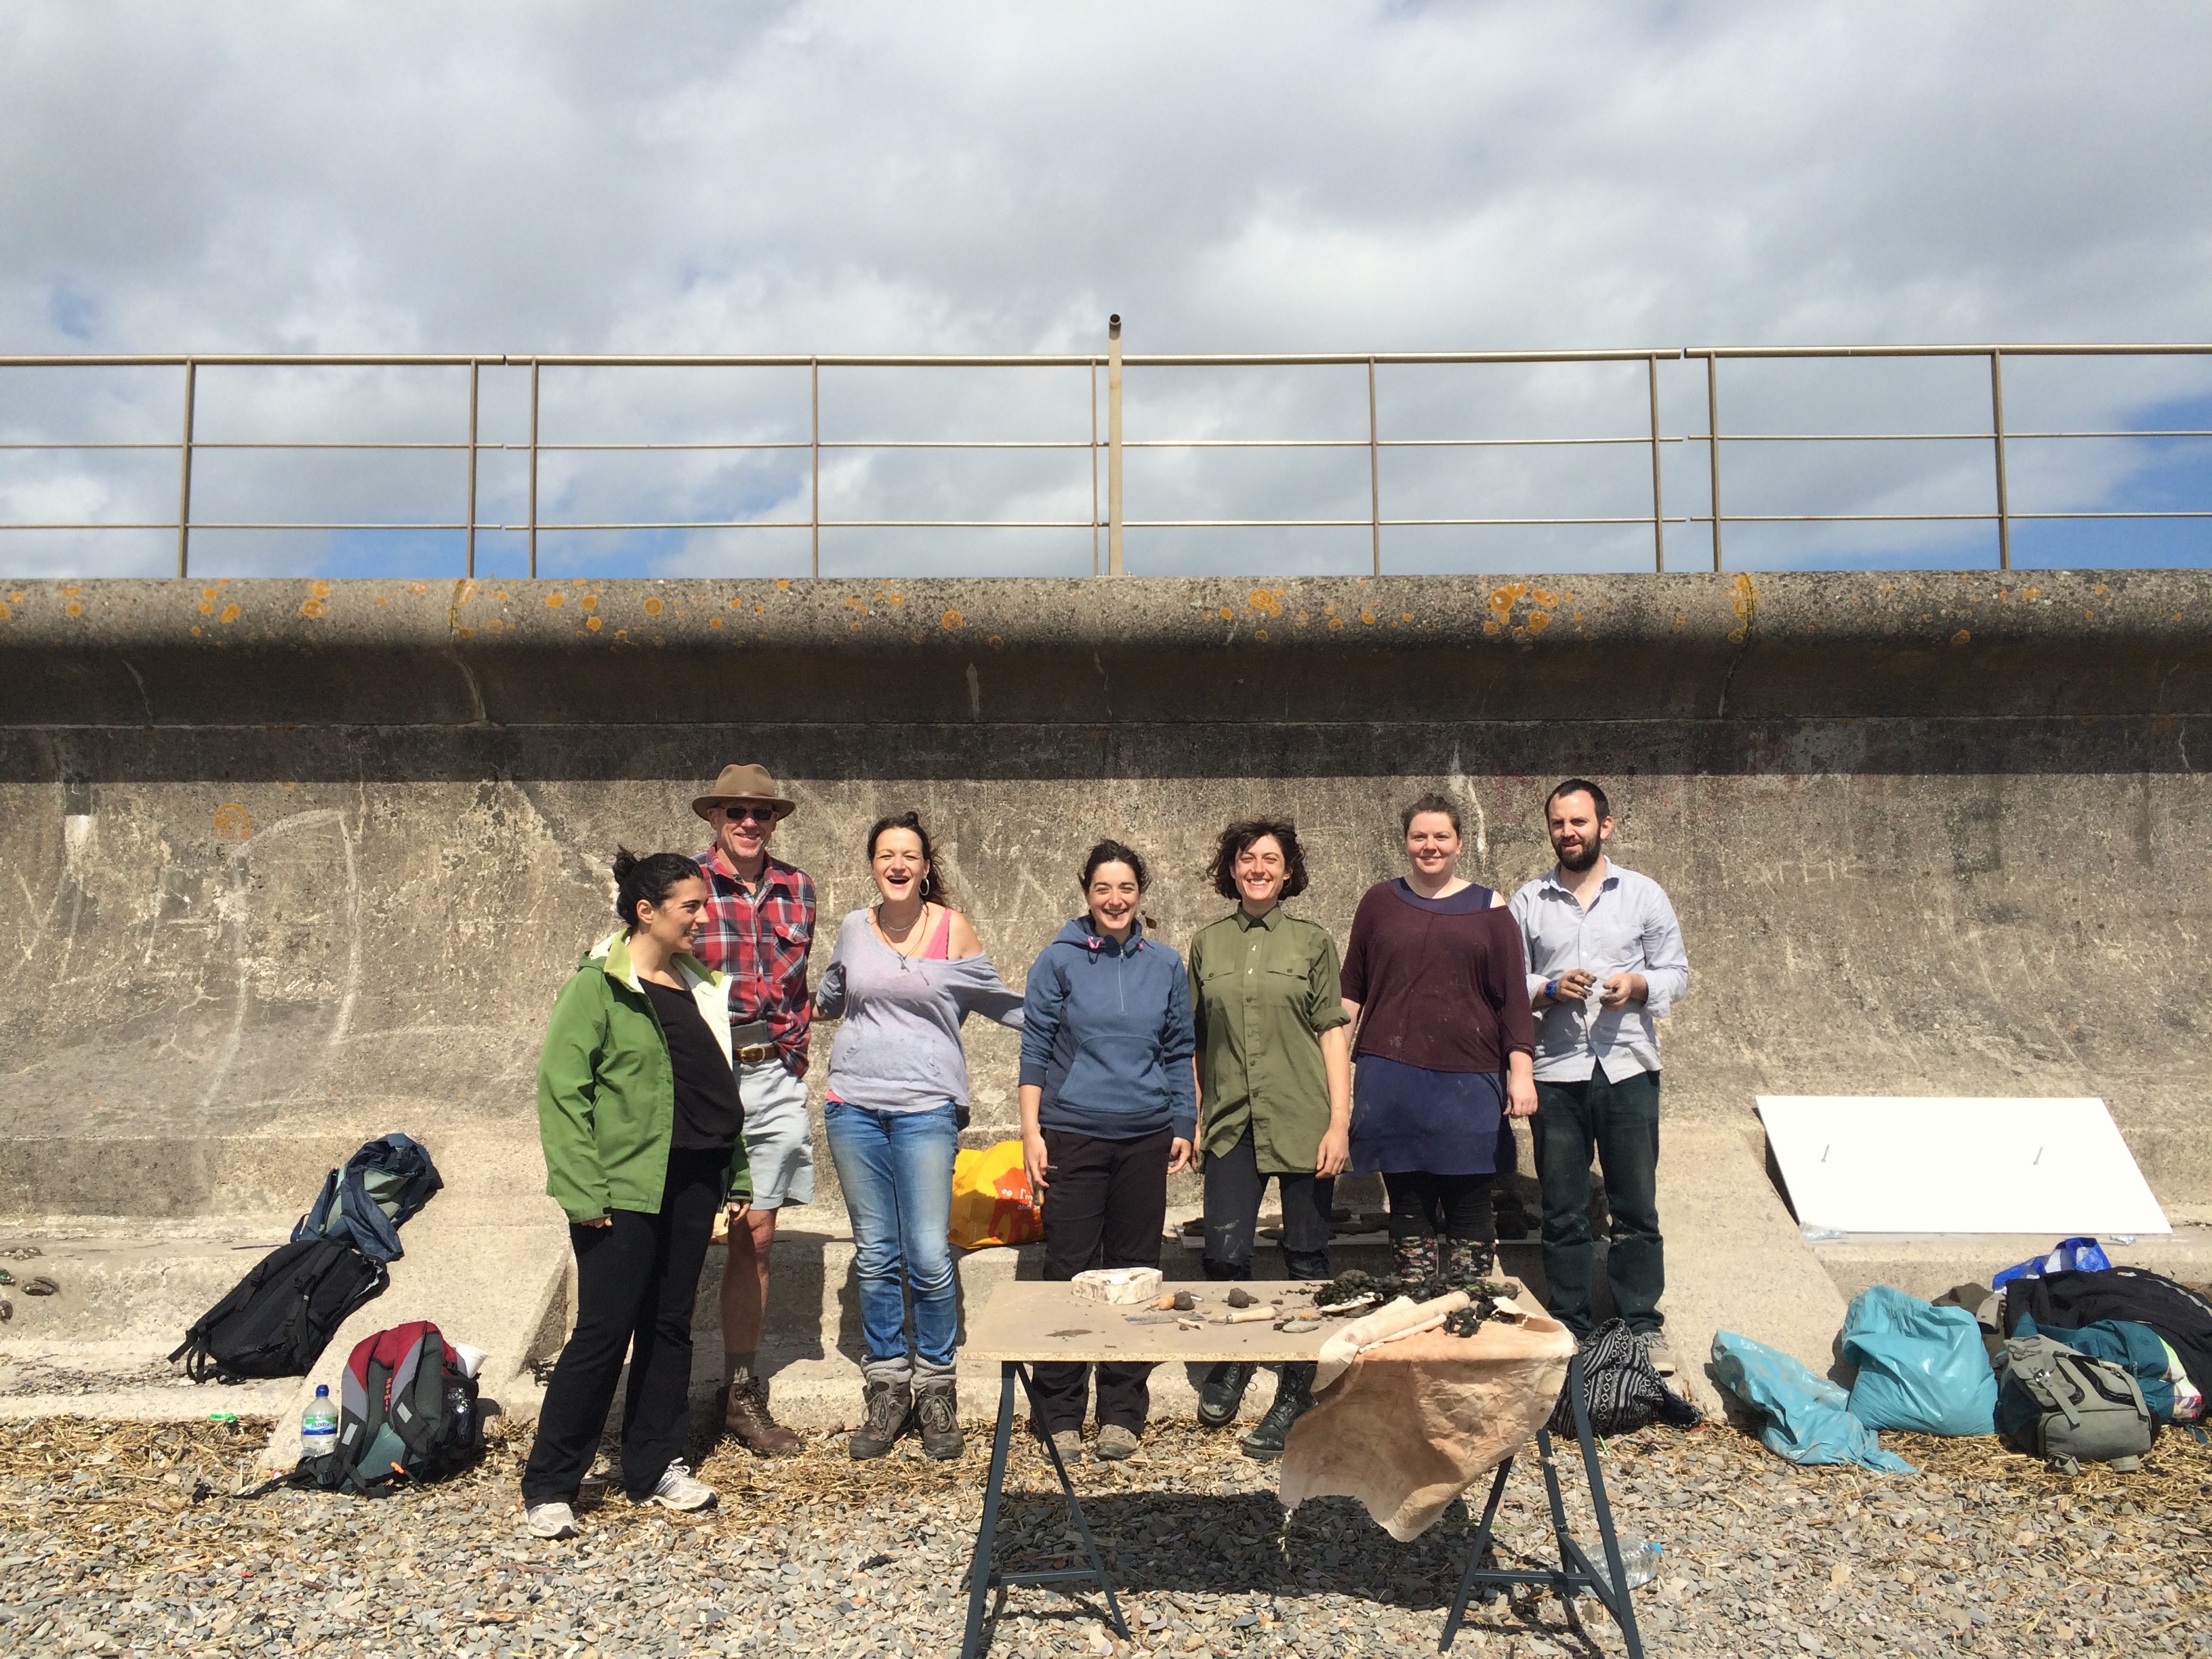 Participants at the 'Into the Mud' workshop, Severn Beach (2016). Photo by Marianna Dudley 